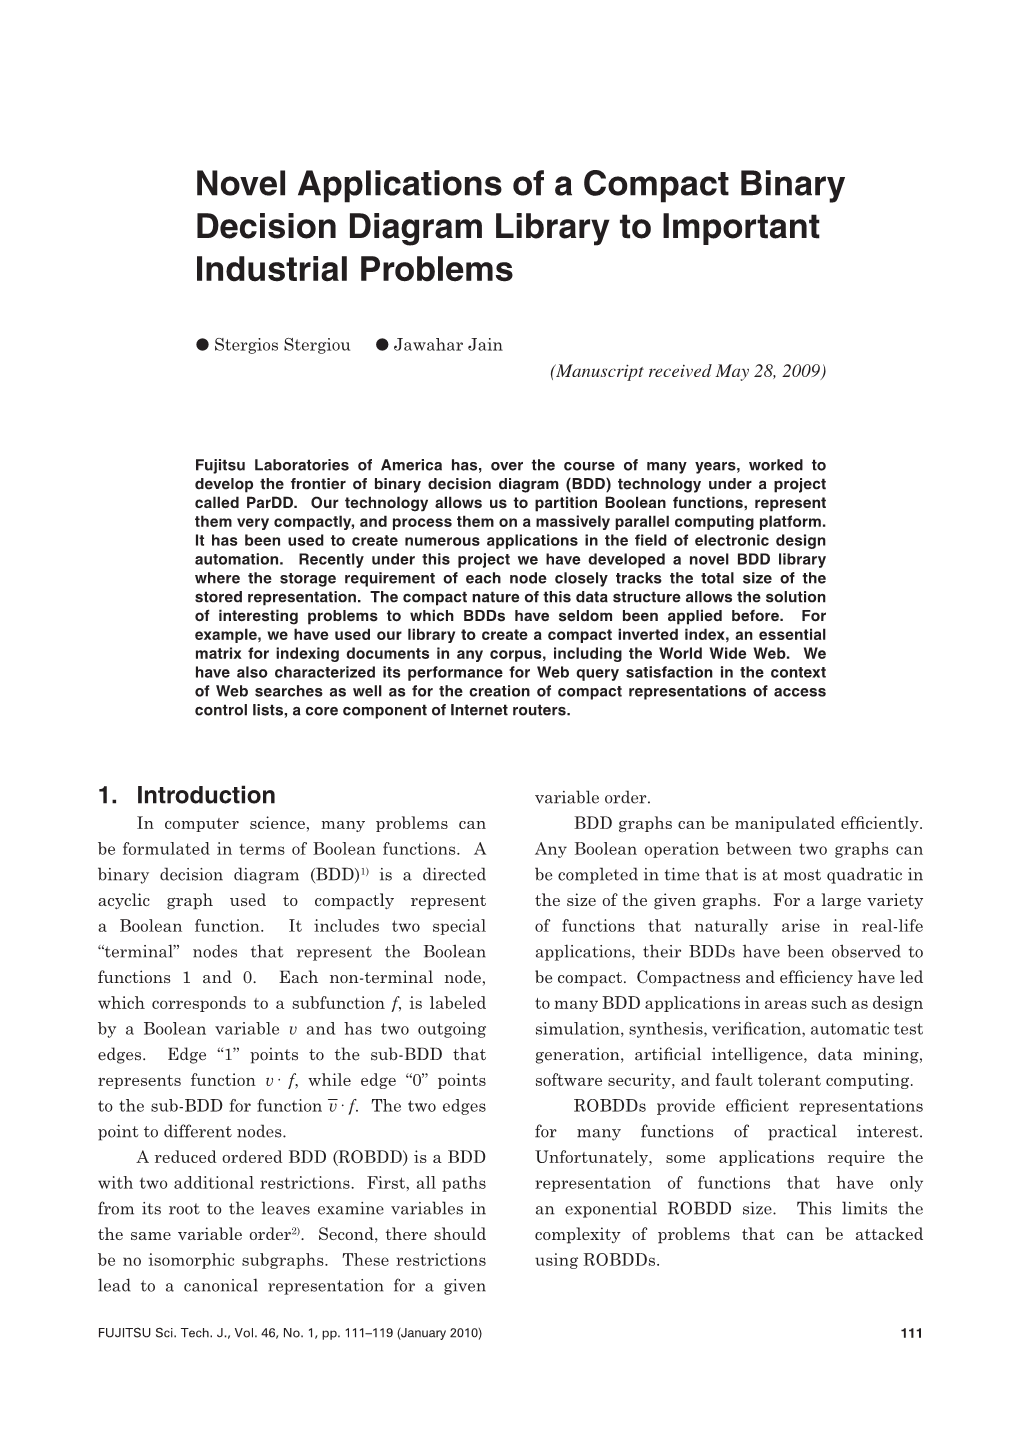 Novel Applications of a Compact Binary Decision Diagram Library to Important Industrial Problems